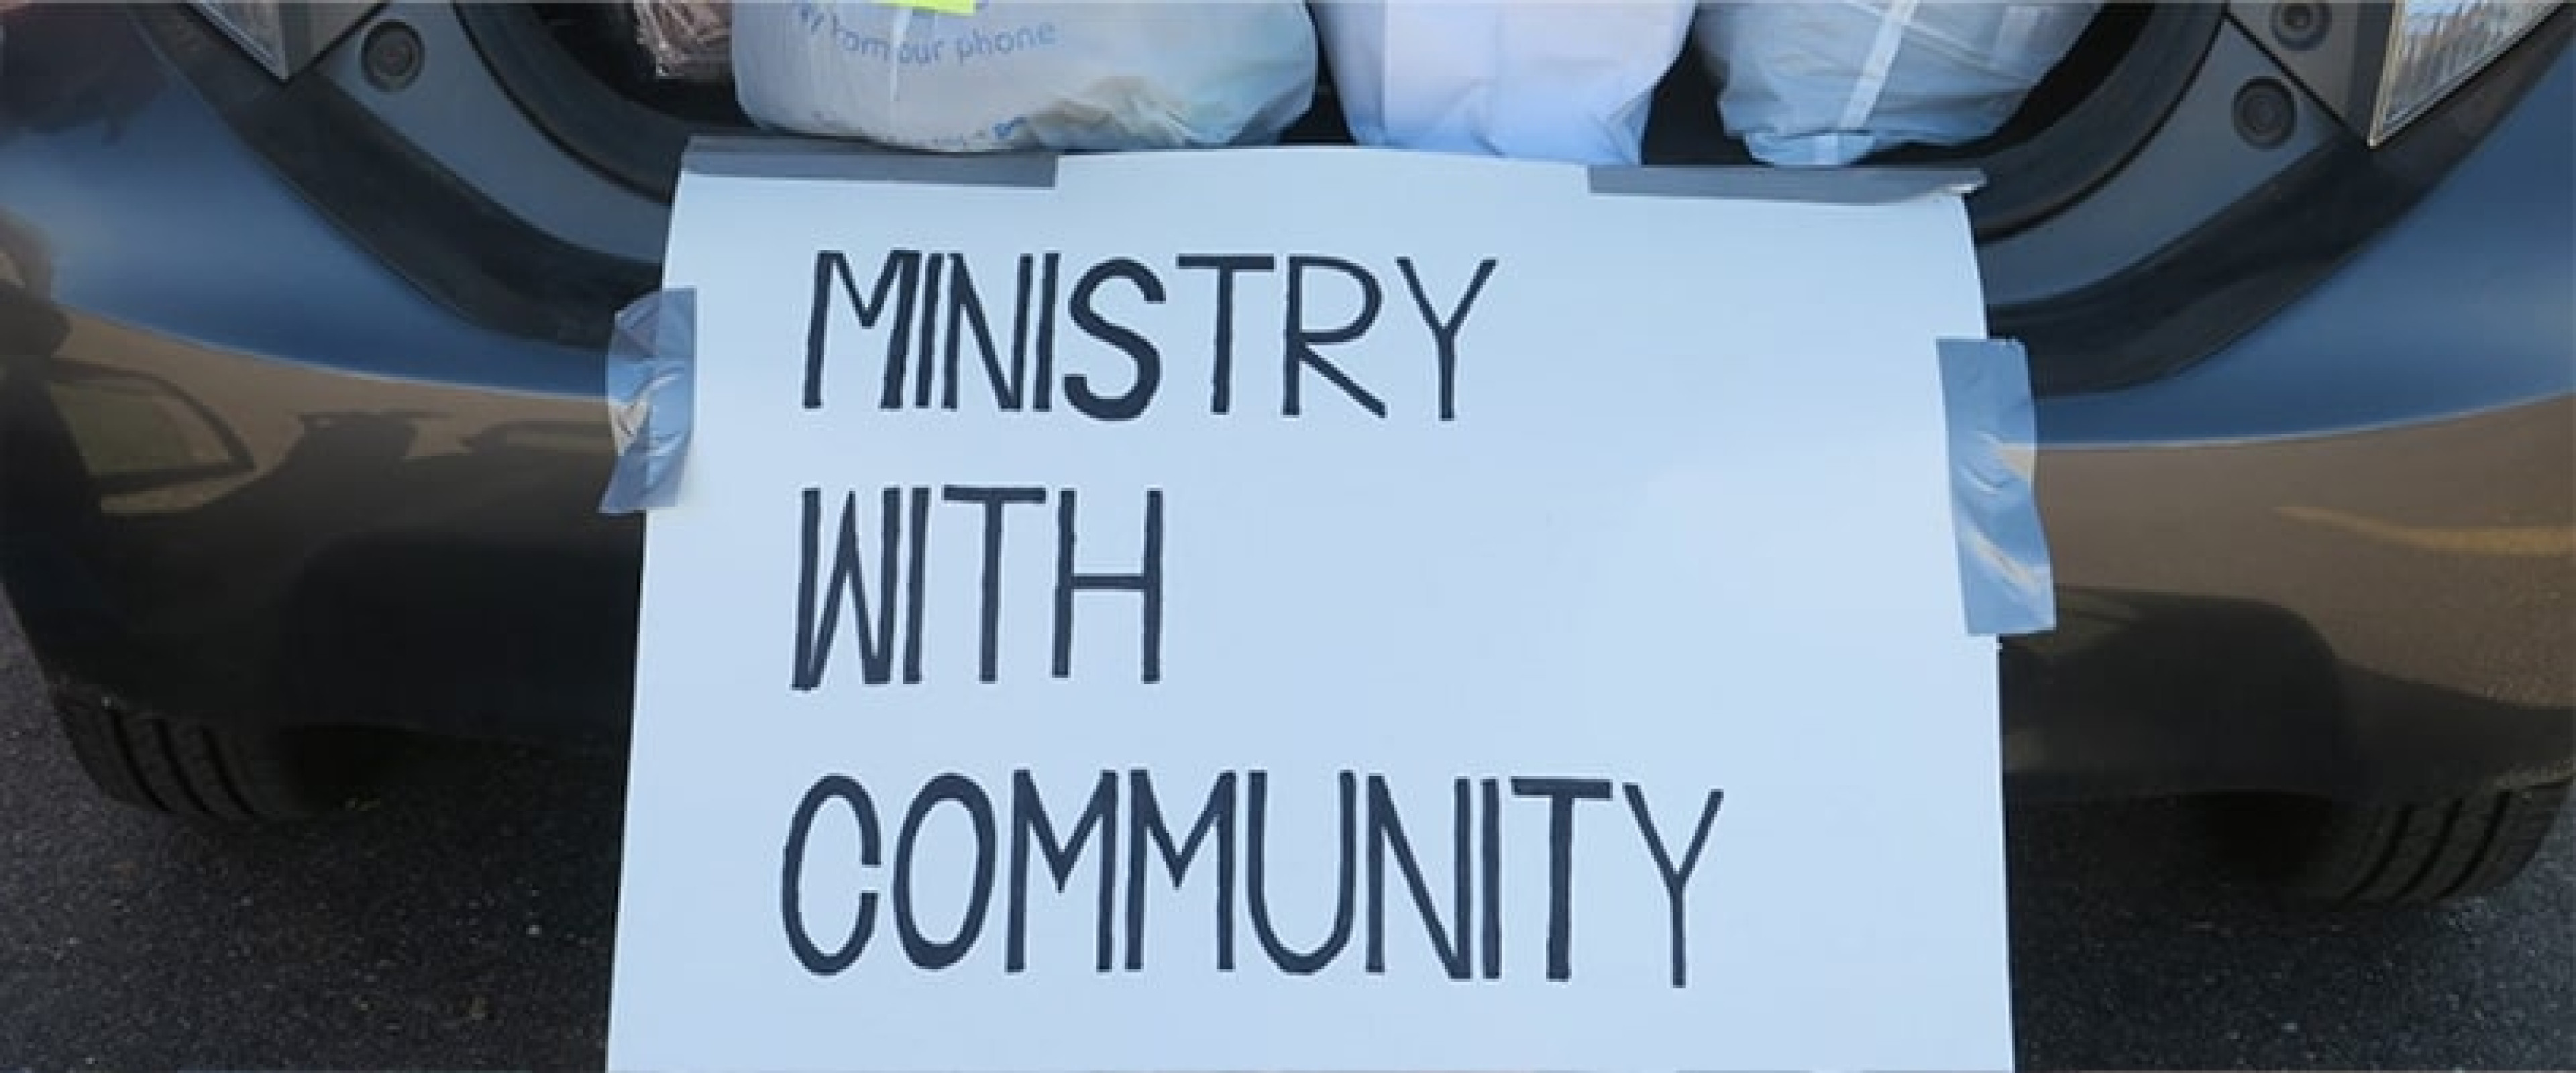 Ministry with Community sign taped to the back of a vehicle 